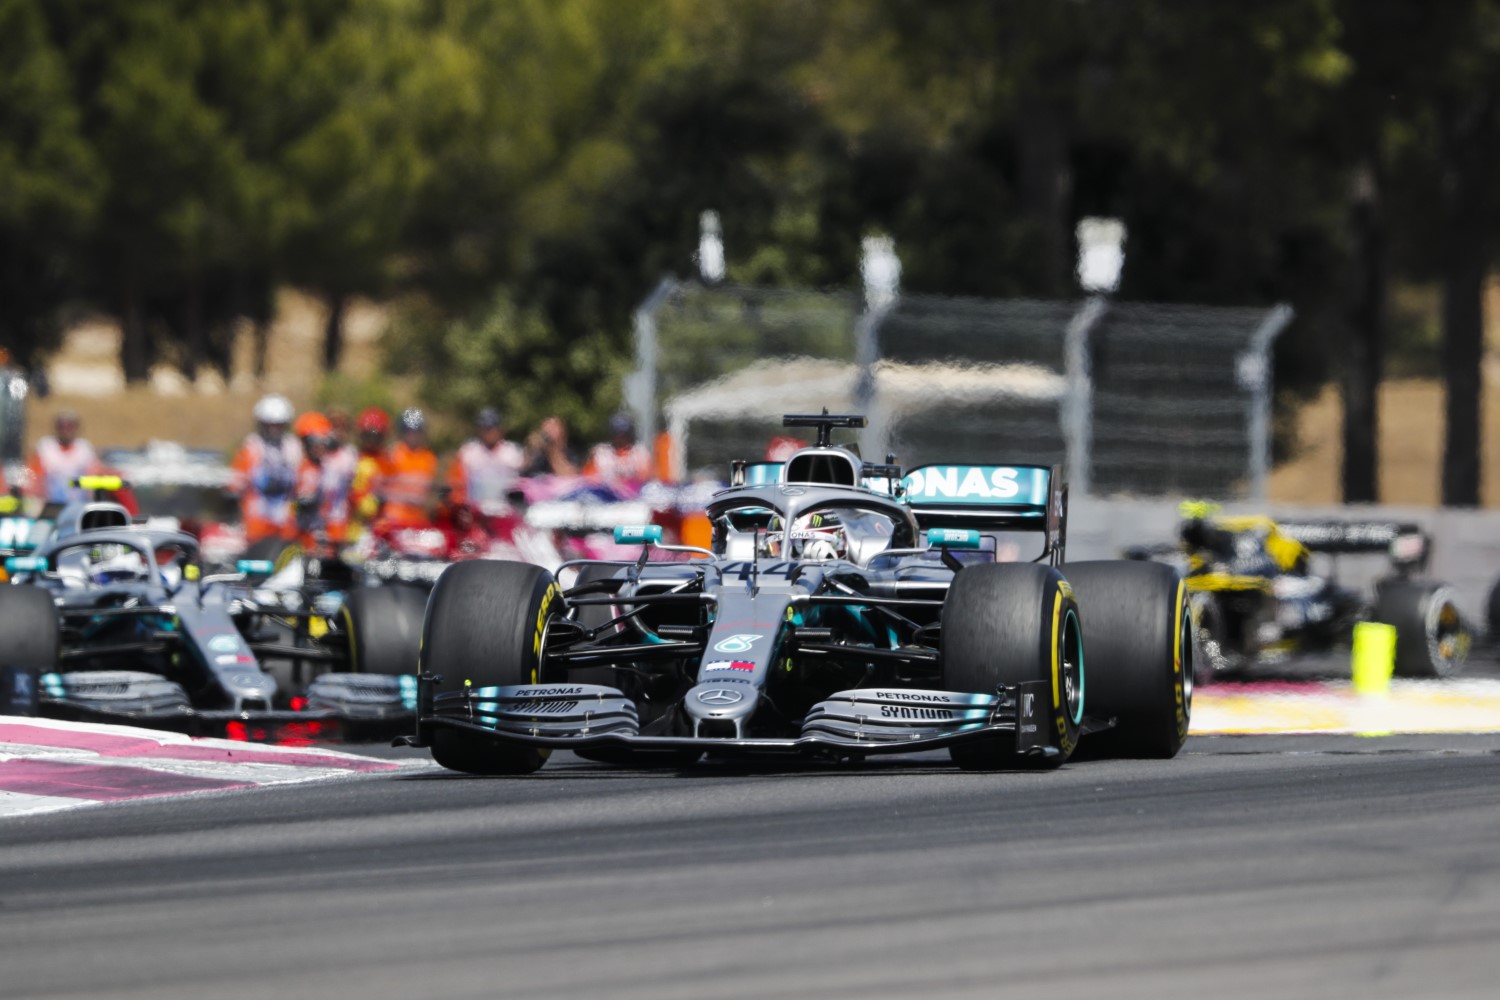 Mercedes can now continue to destroy the competition